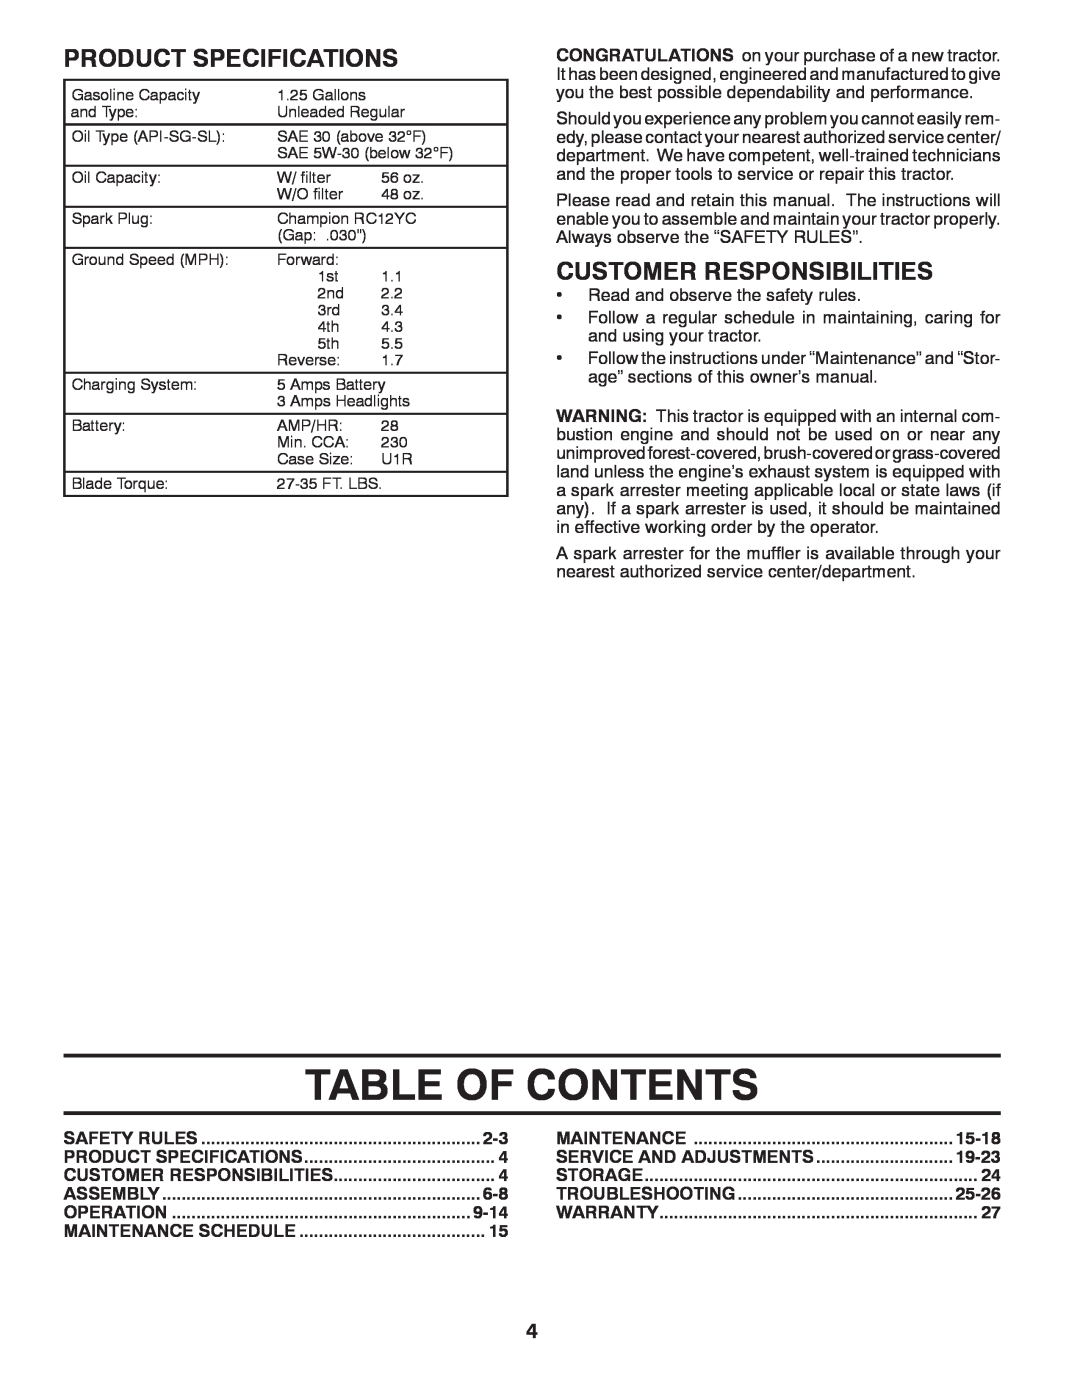 Poulan 96012006802, 414754 manual Table Of Contents, Product Specifications, Customer Responsibilities 